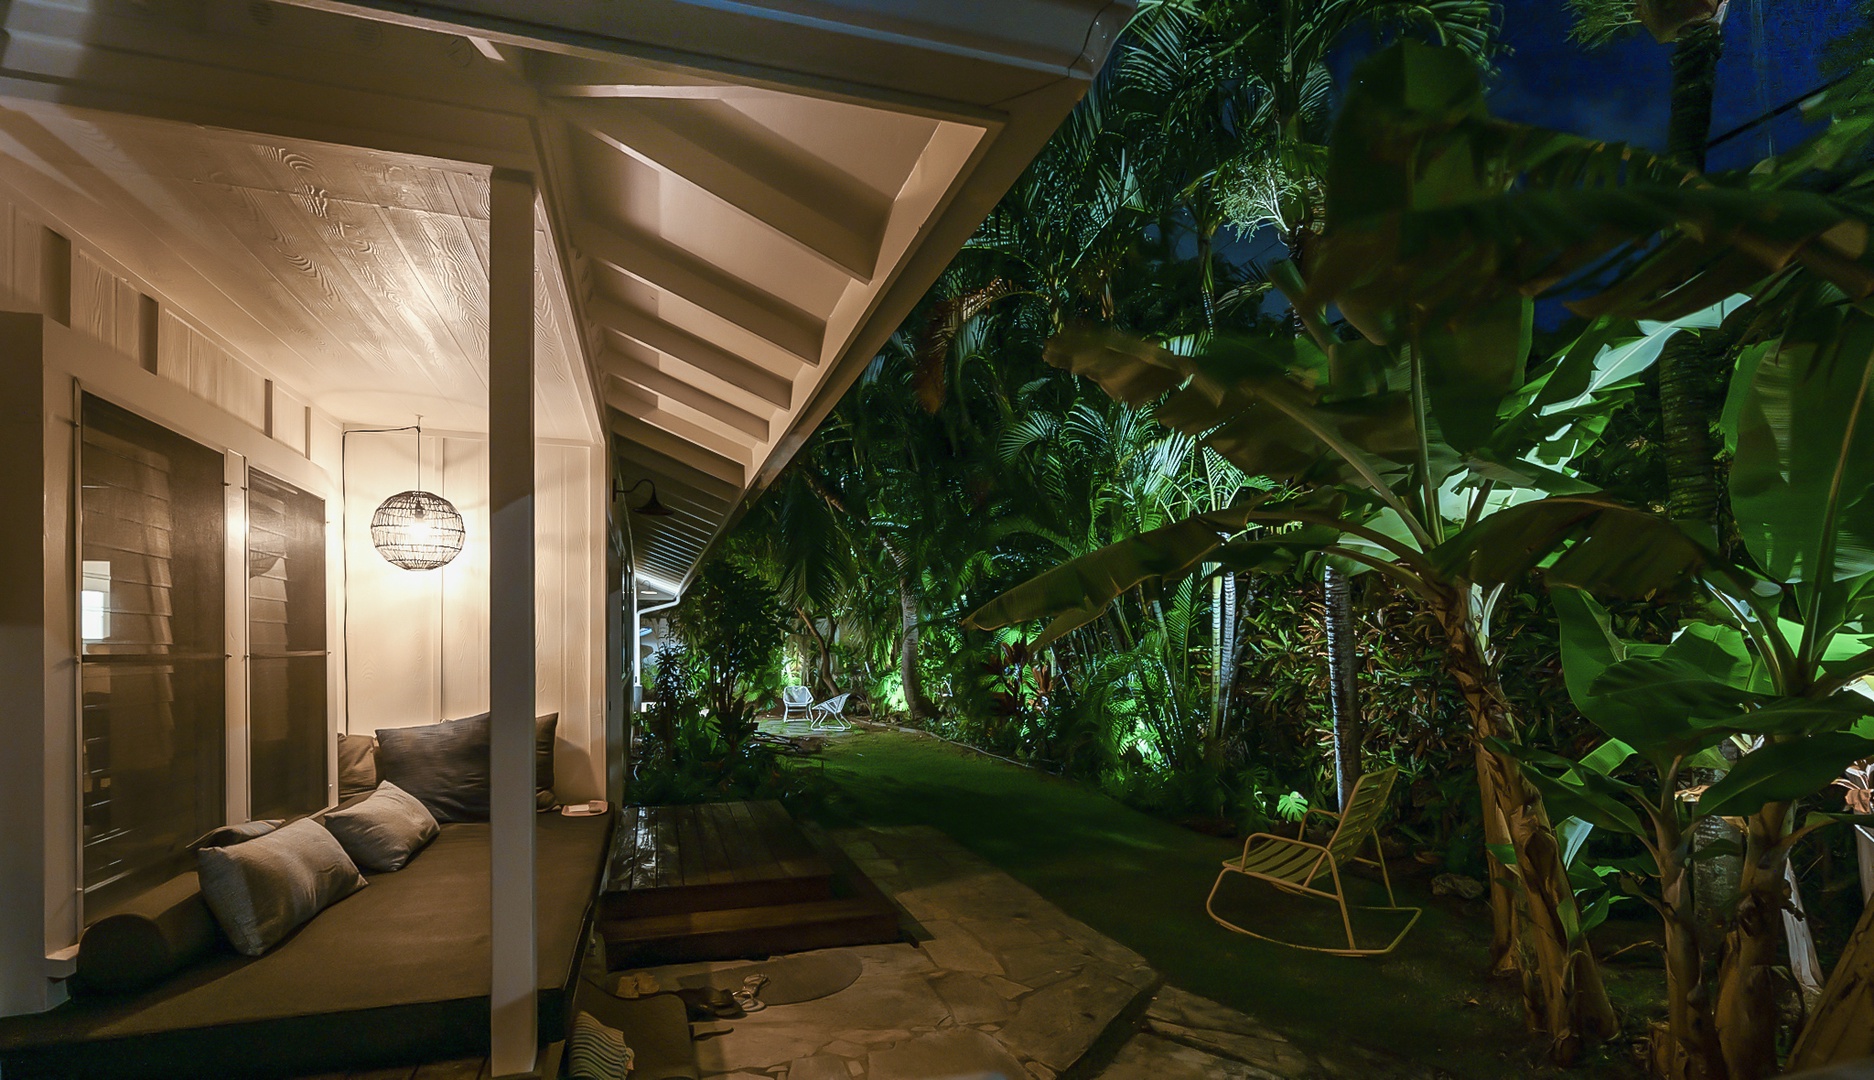 Kailua Vacation Rentals, Lanikai Ola Nani - Nestled in nature, our exterior day bed invites you to unwind and savor the beauty of the outdoors even at night